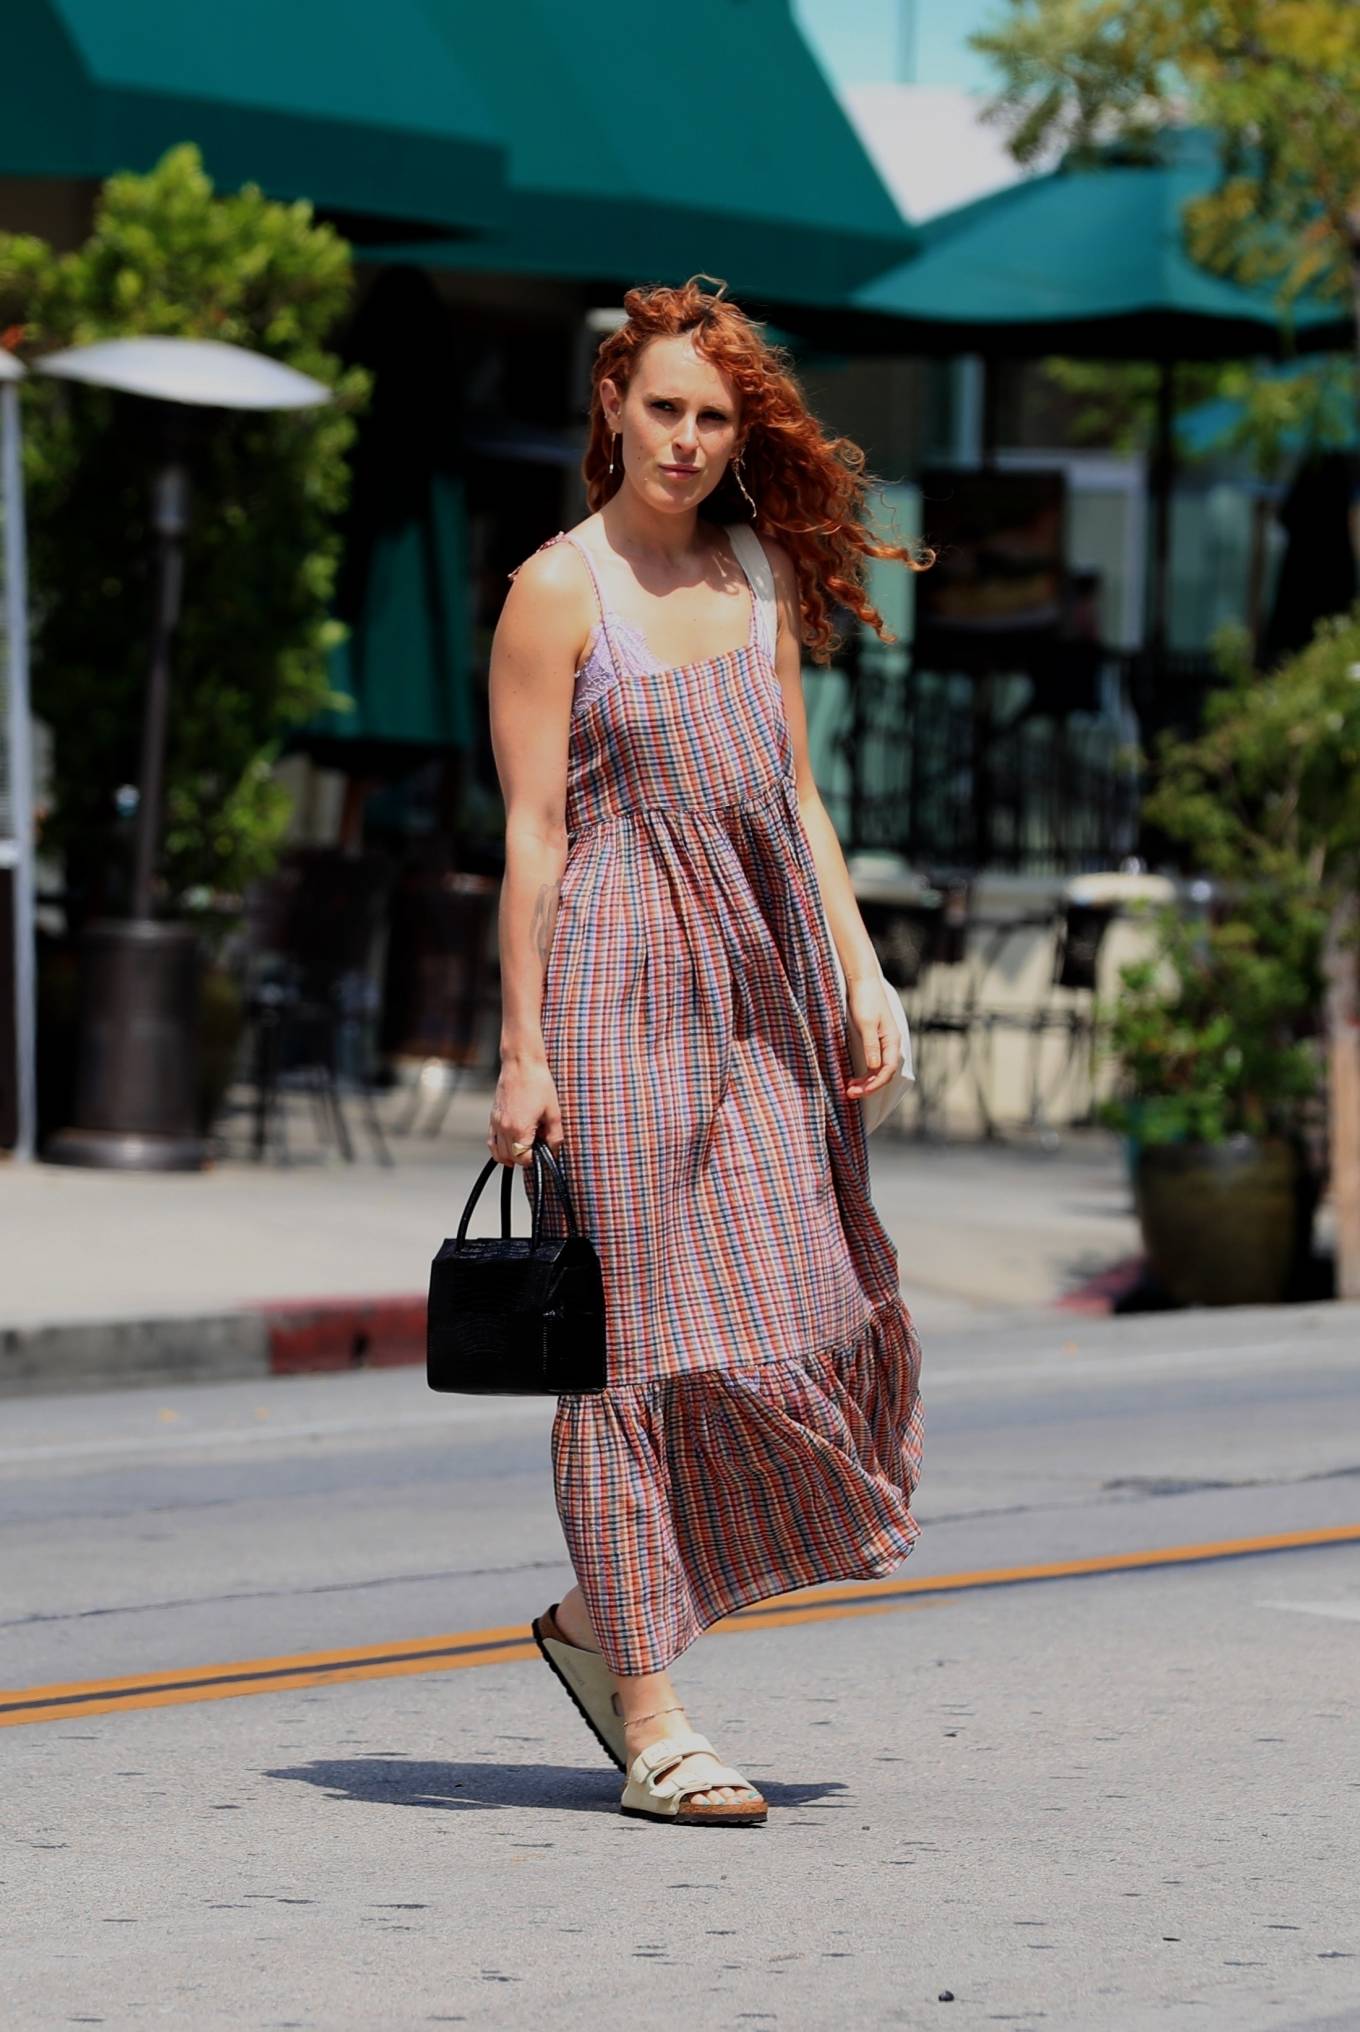 Rumer Willis - Seen after lunch at Urth Caffe on Melrose Avenue in West Hollywood